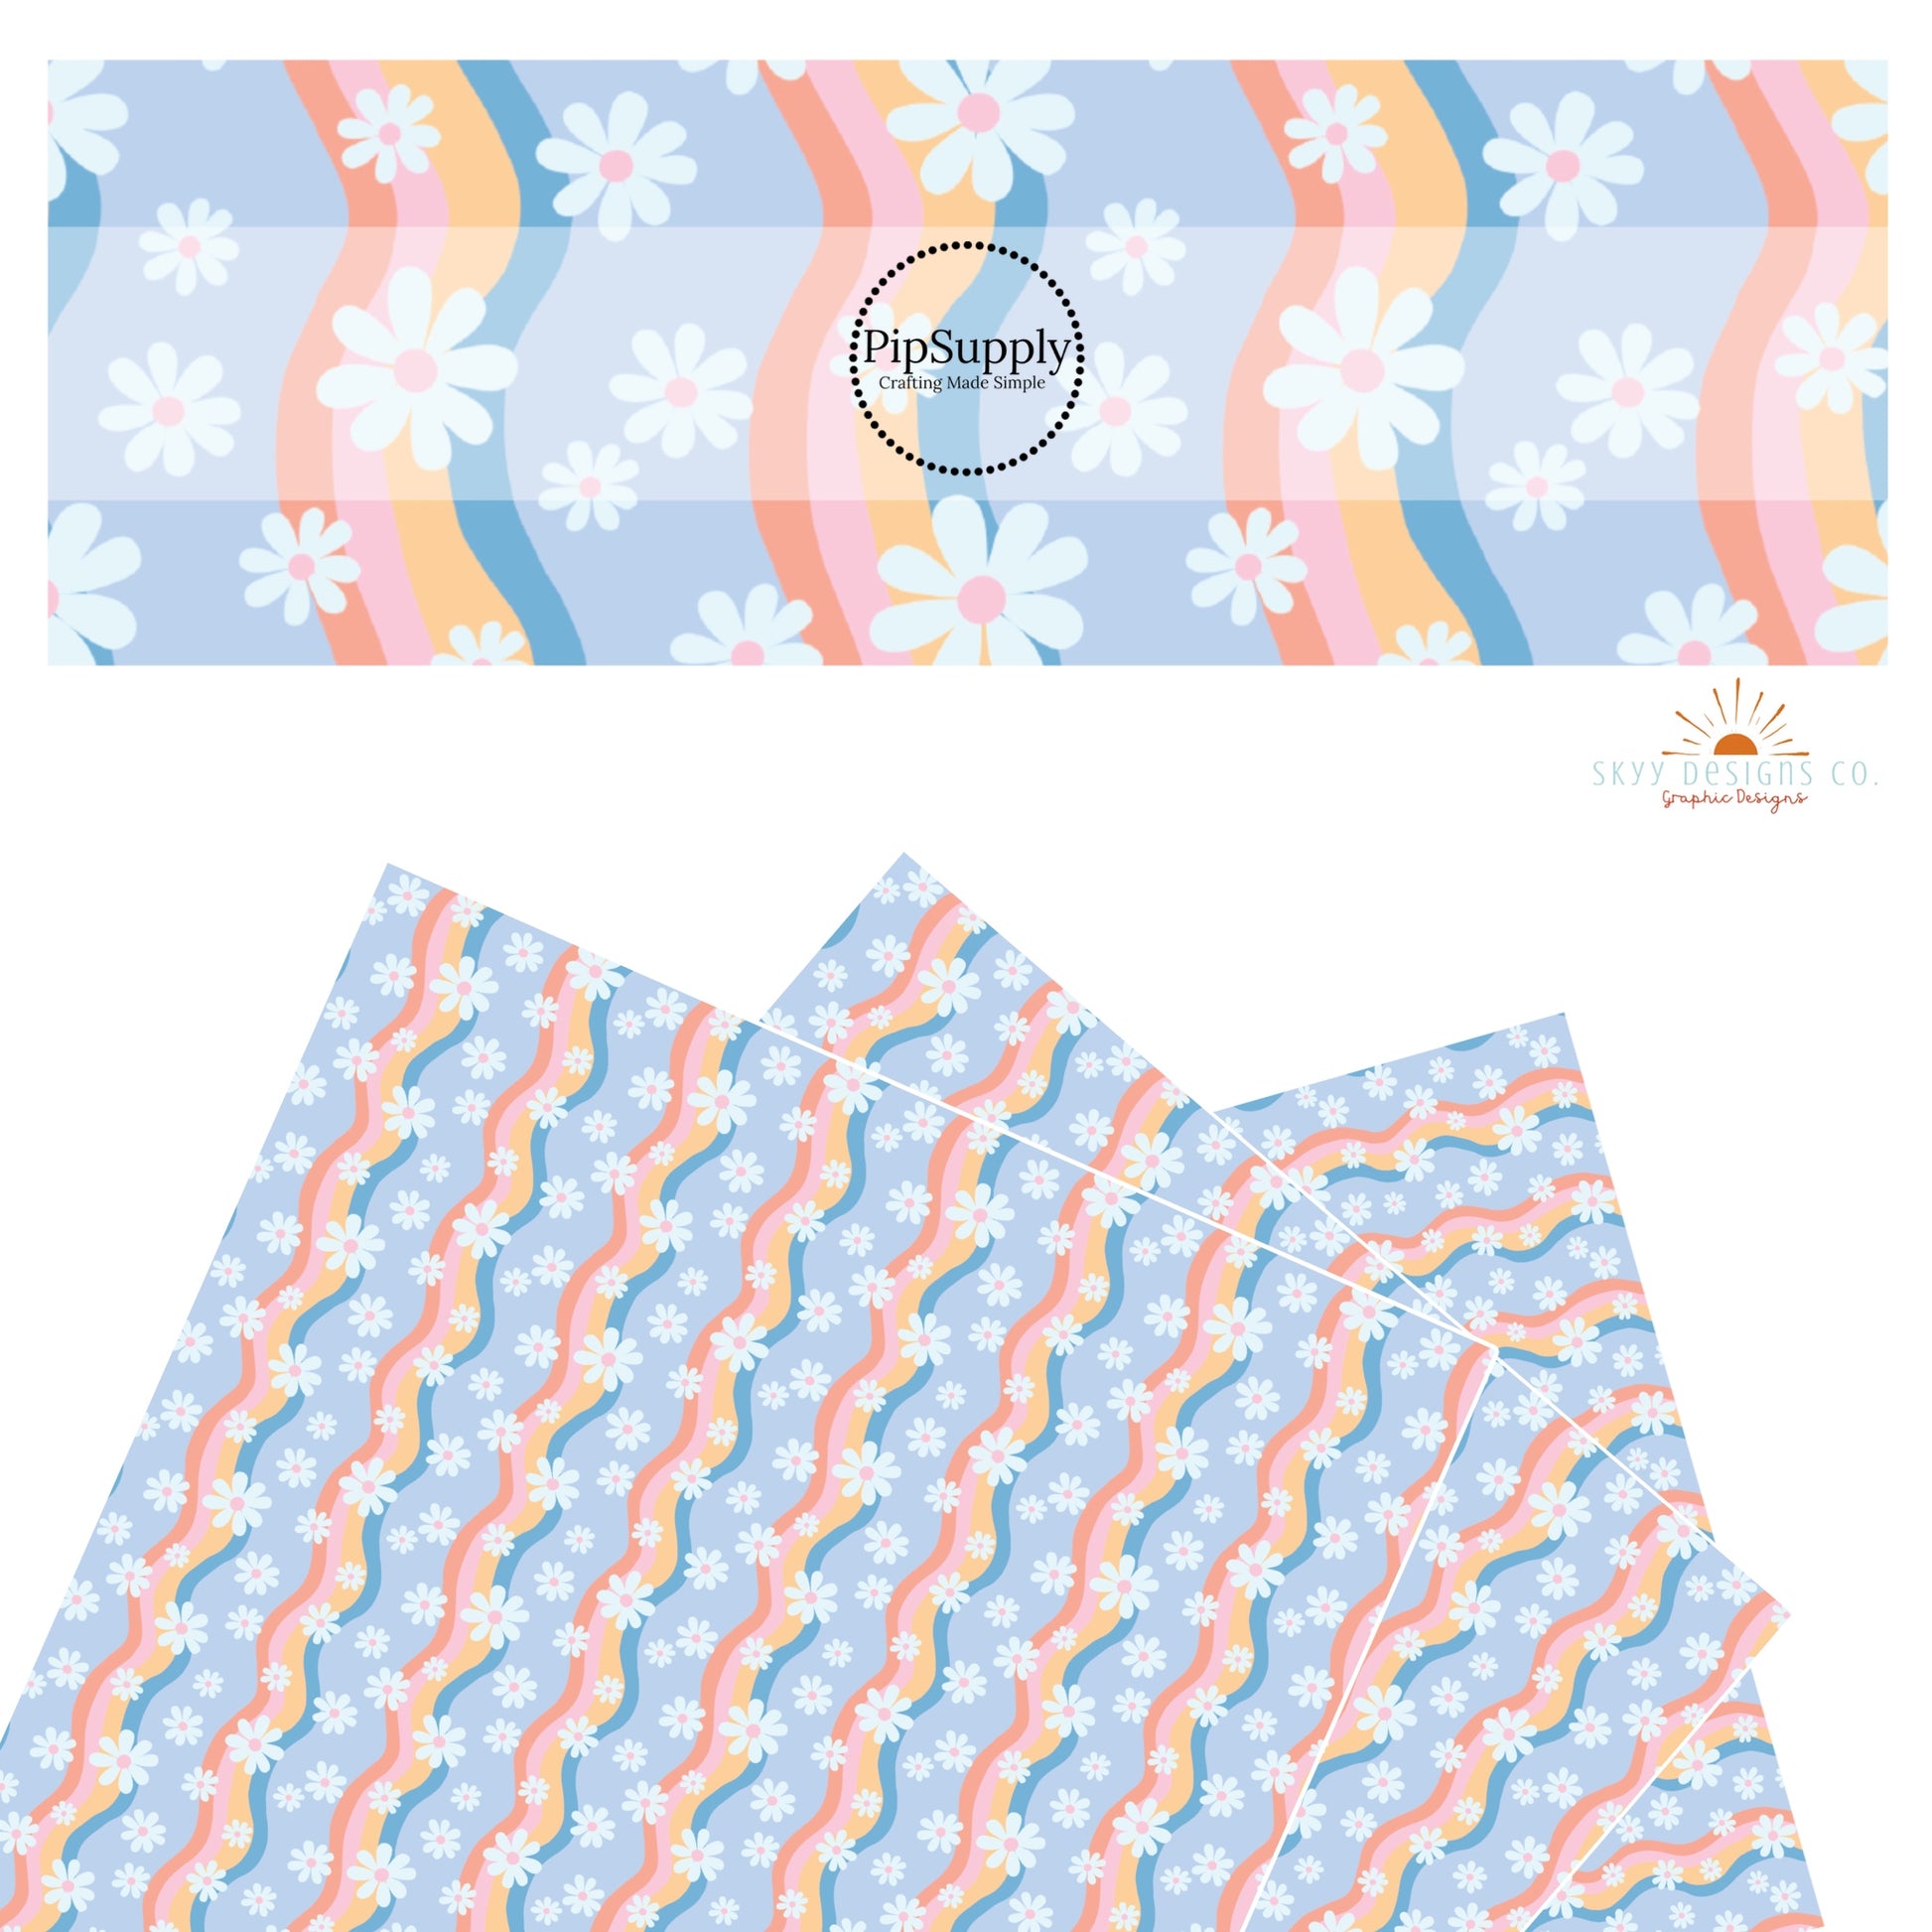 Wavy pastel rainbow stripes with white daisies with various sizes on periwinkle faux leather sheets. 